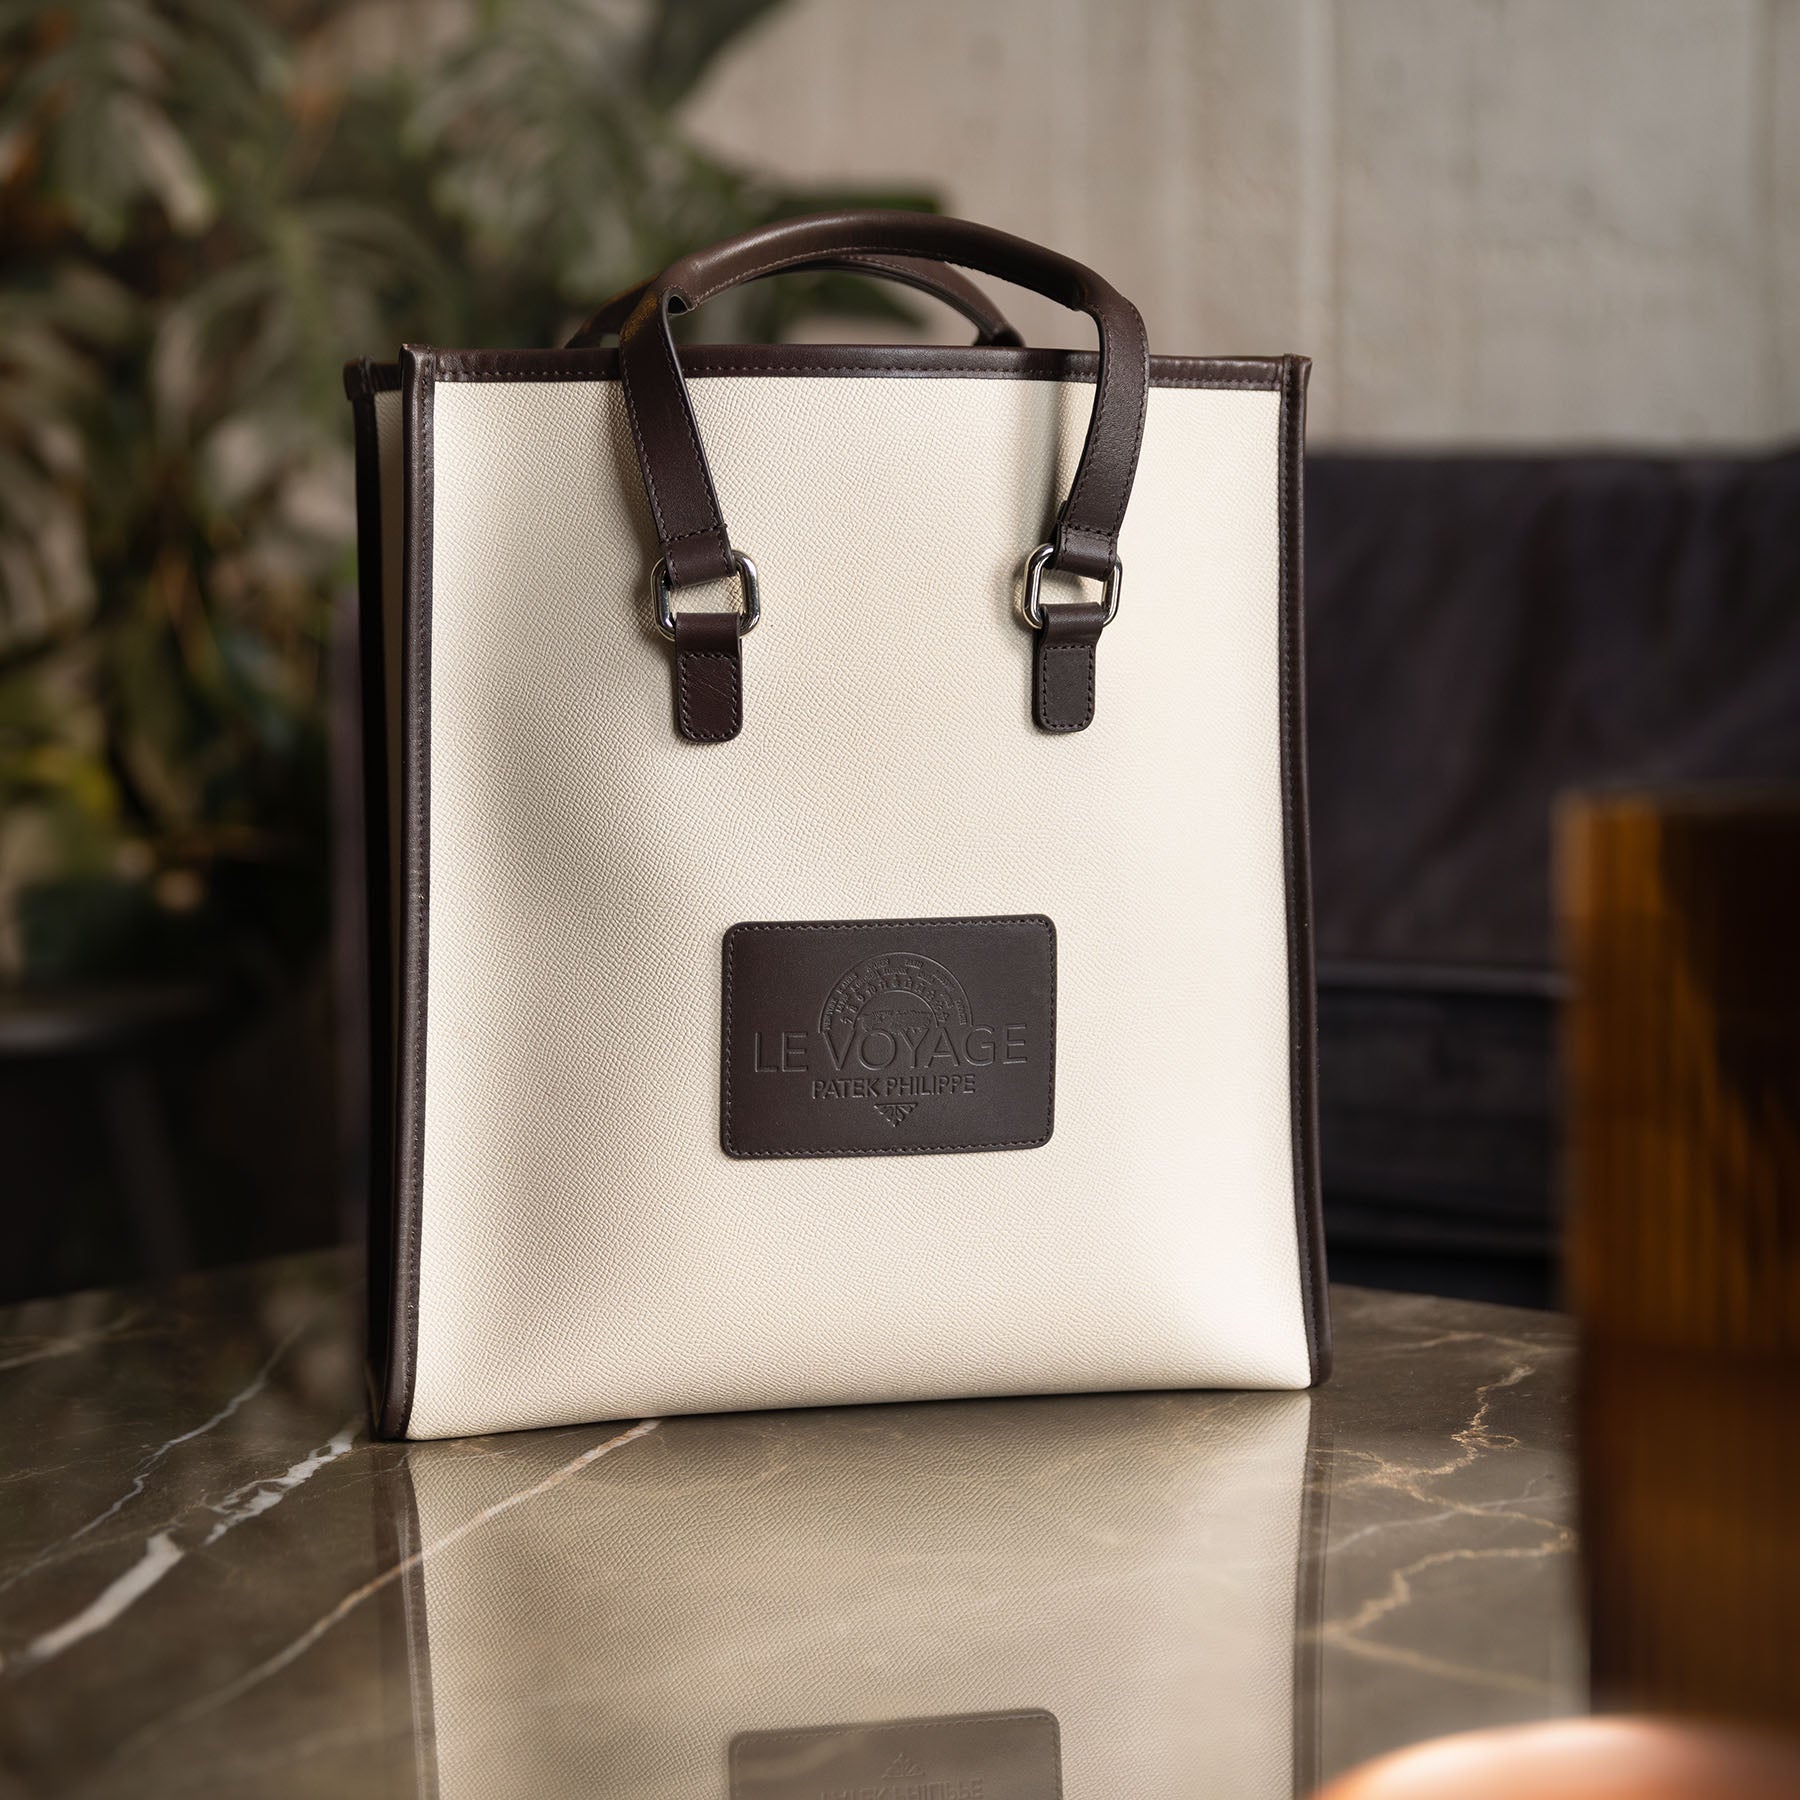 The Leather Philippe Tote